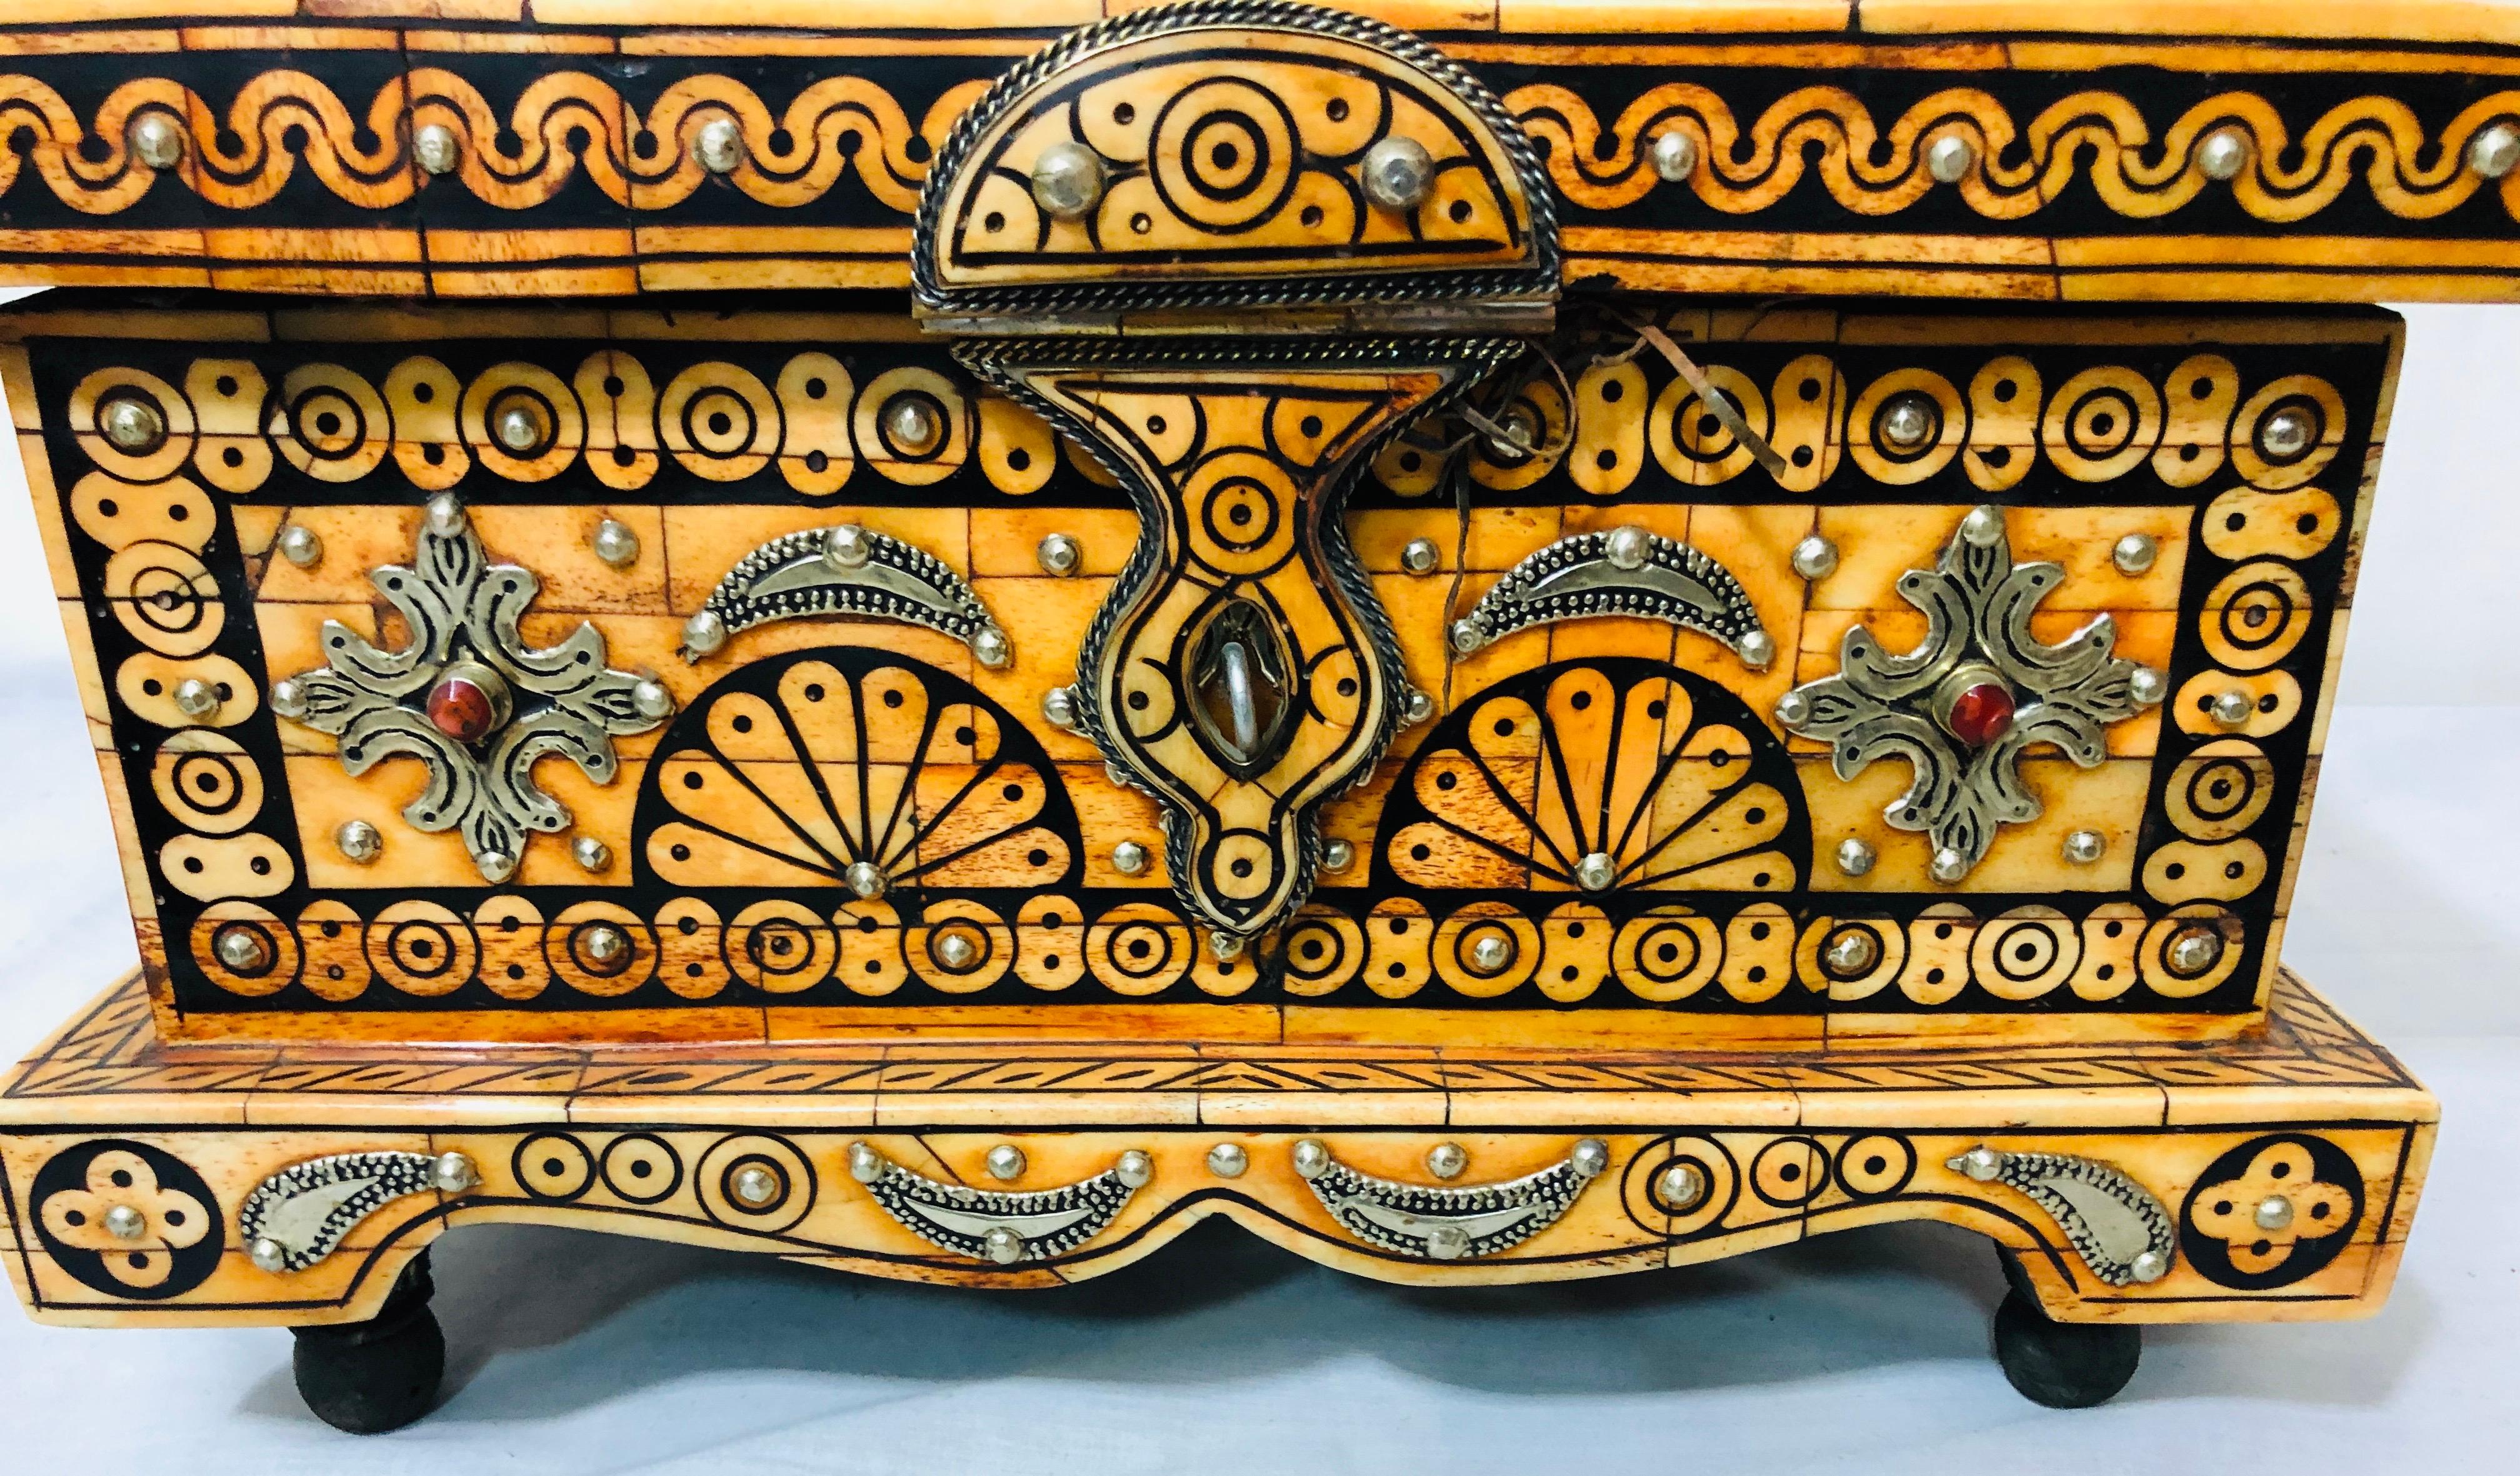 A decorative orange bone and black tribal design chest or jewelry box. The chest interior is leather and features gorgeous brass inlay design with decorative stones.